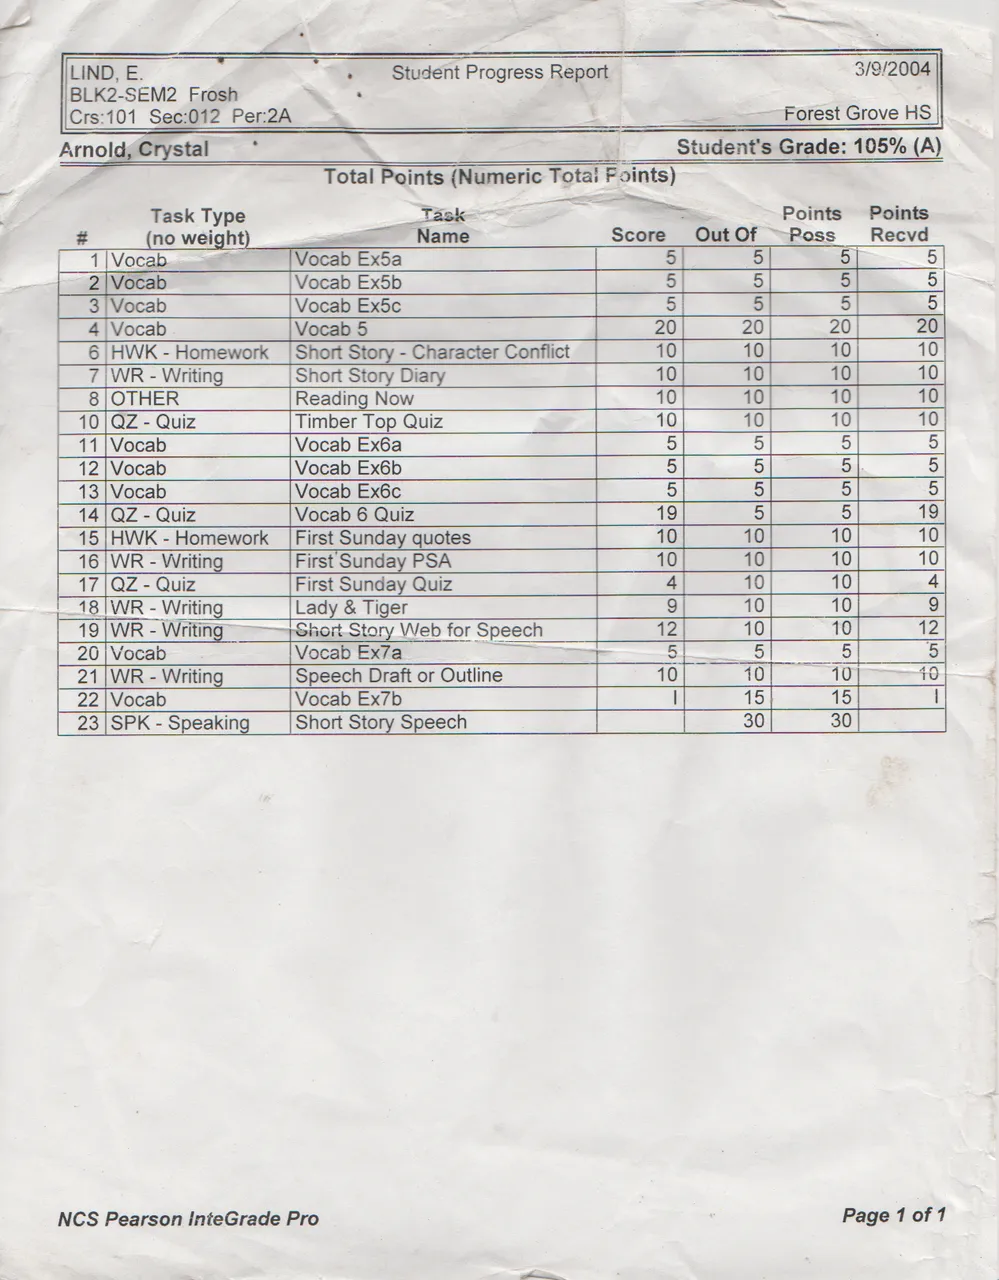 2004-03-09 - Tuesday - Student Progress Report - Crystal Arnold, Lind E, Vocab, Writing, English, Reading.png